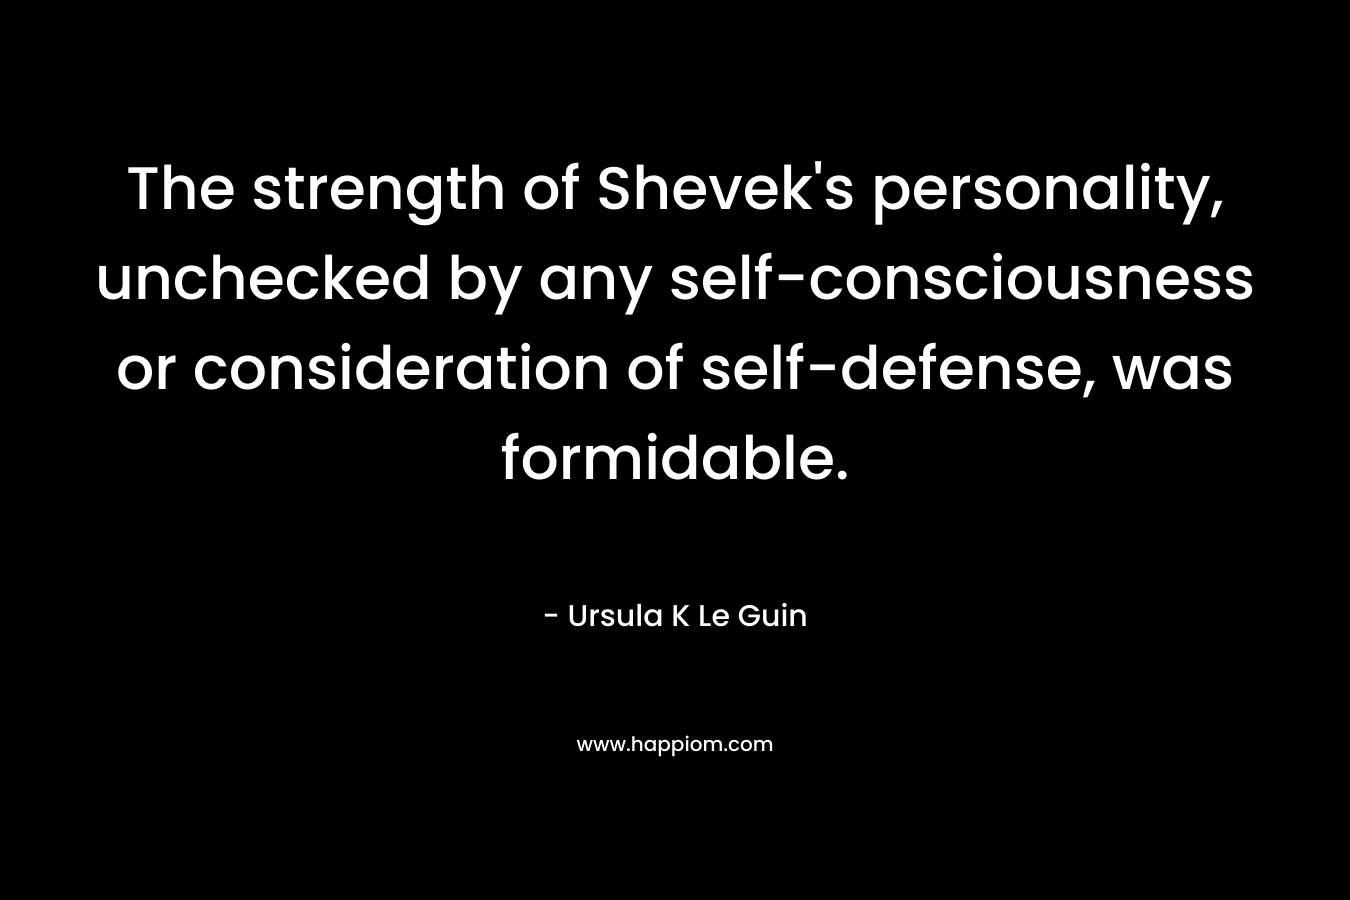 The strength of Shevek’s personality, unchecked by any self-consciousness or consideration of self-defense, was formidable. – Ursula K Le Guin